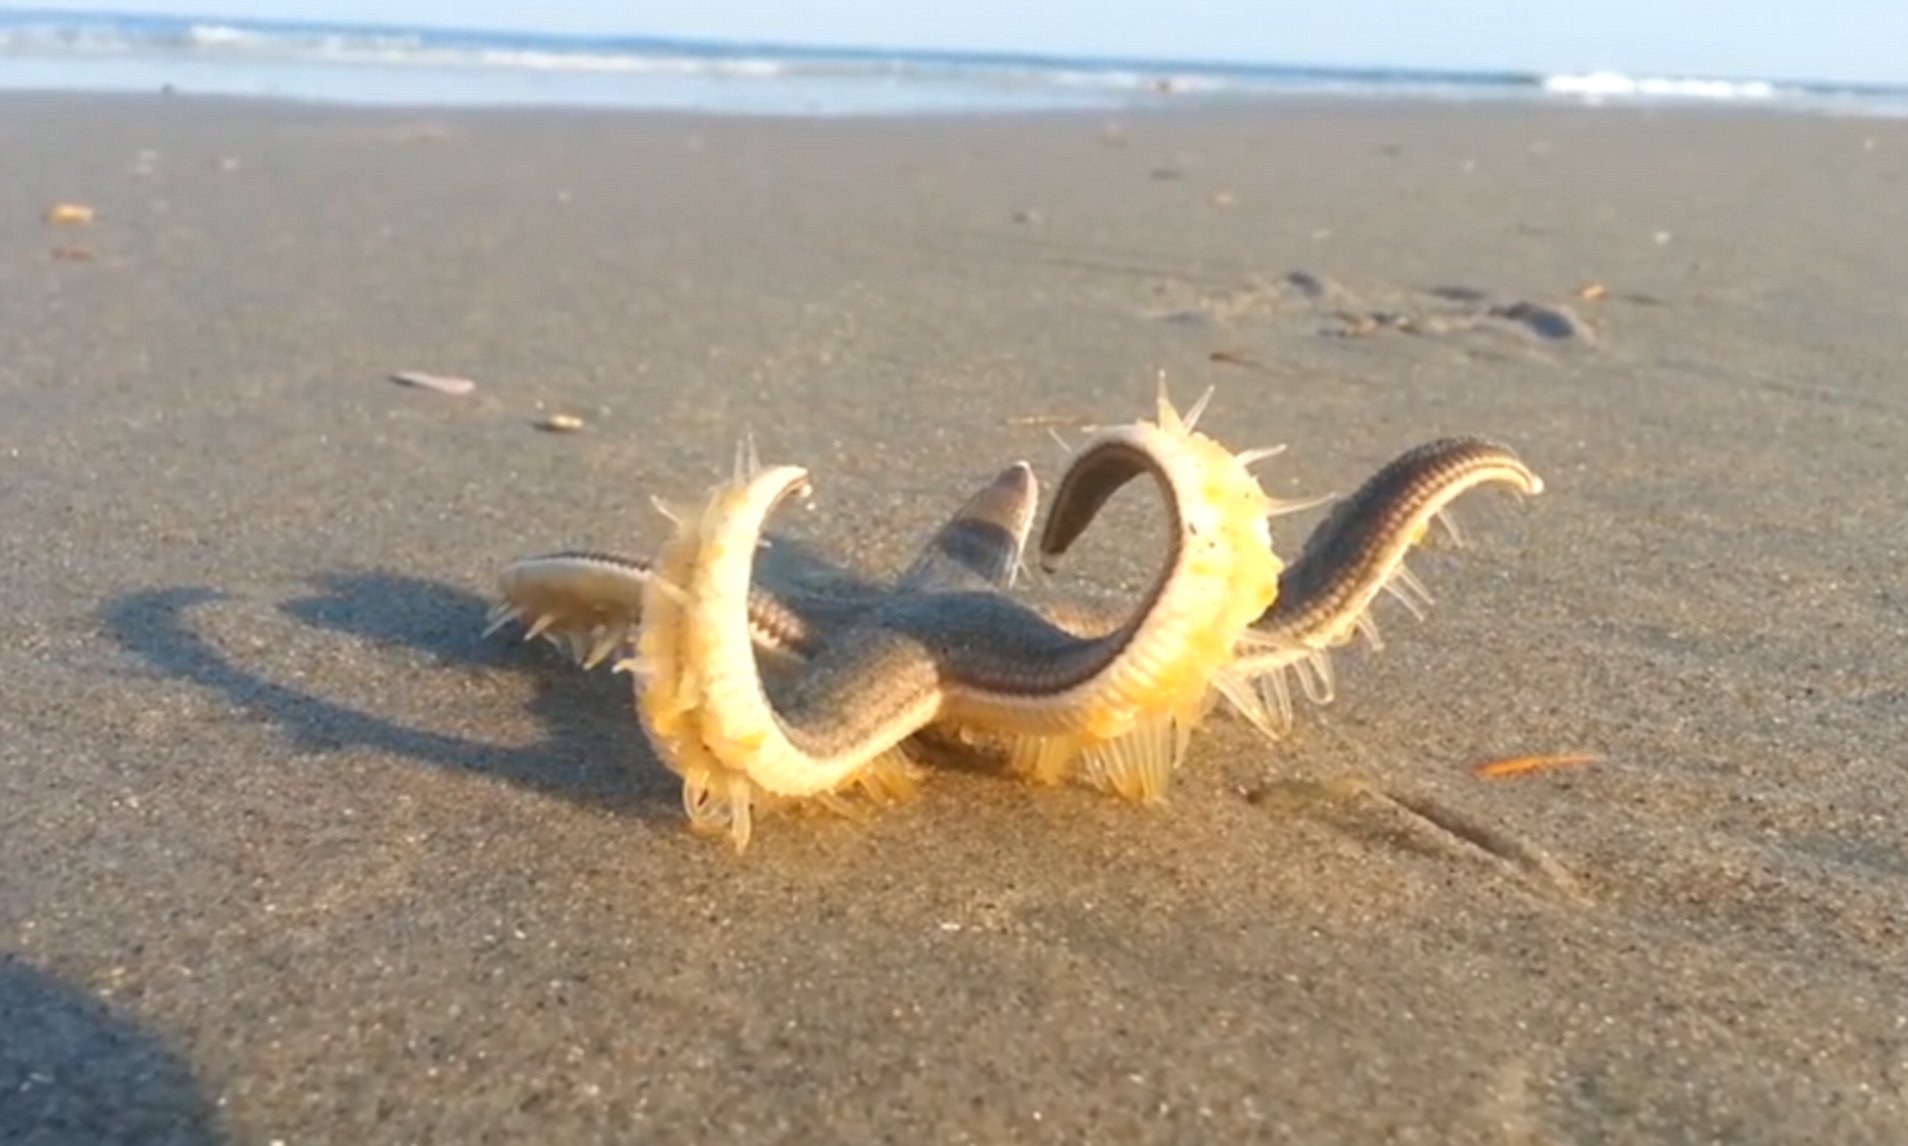 Footage shows a starfish 'walking' on a beach in Corolla | Daily Mail Online